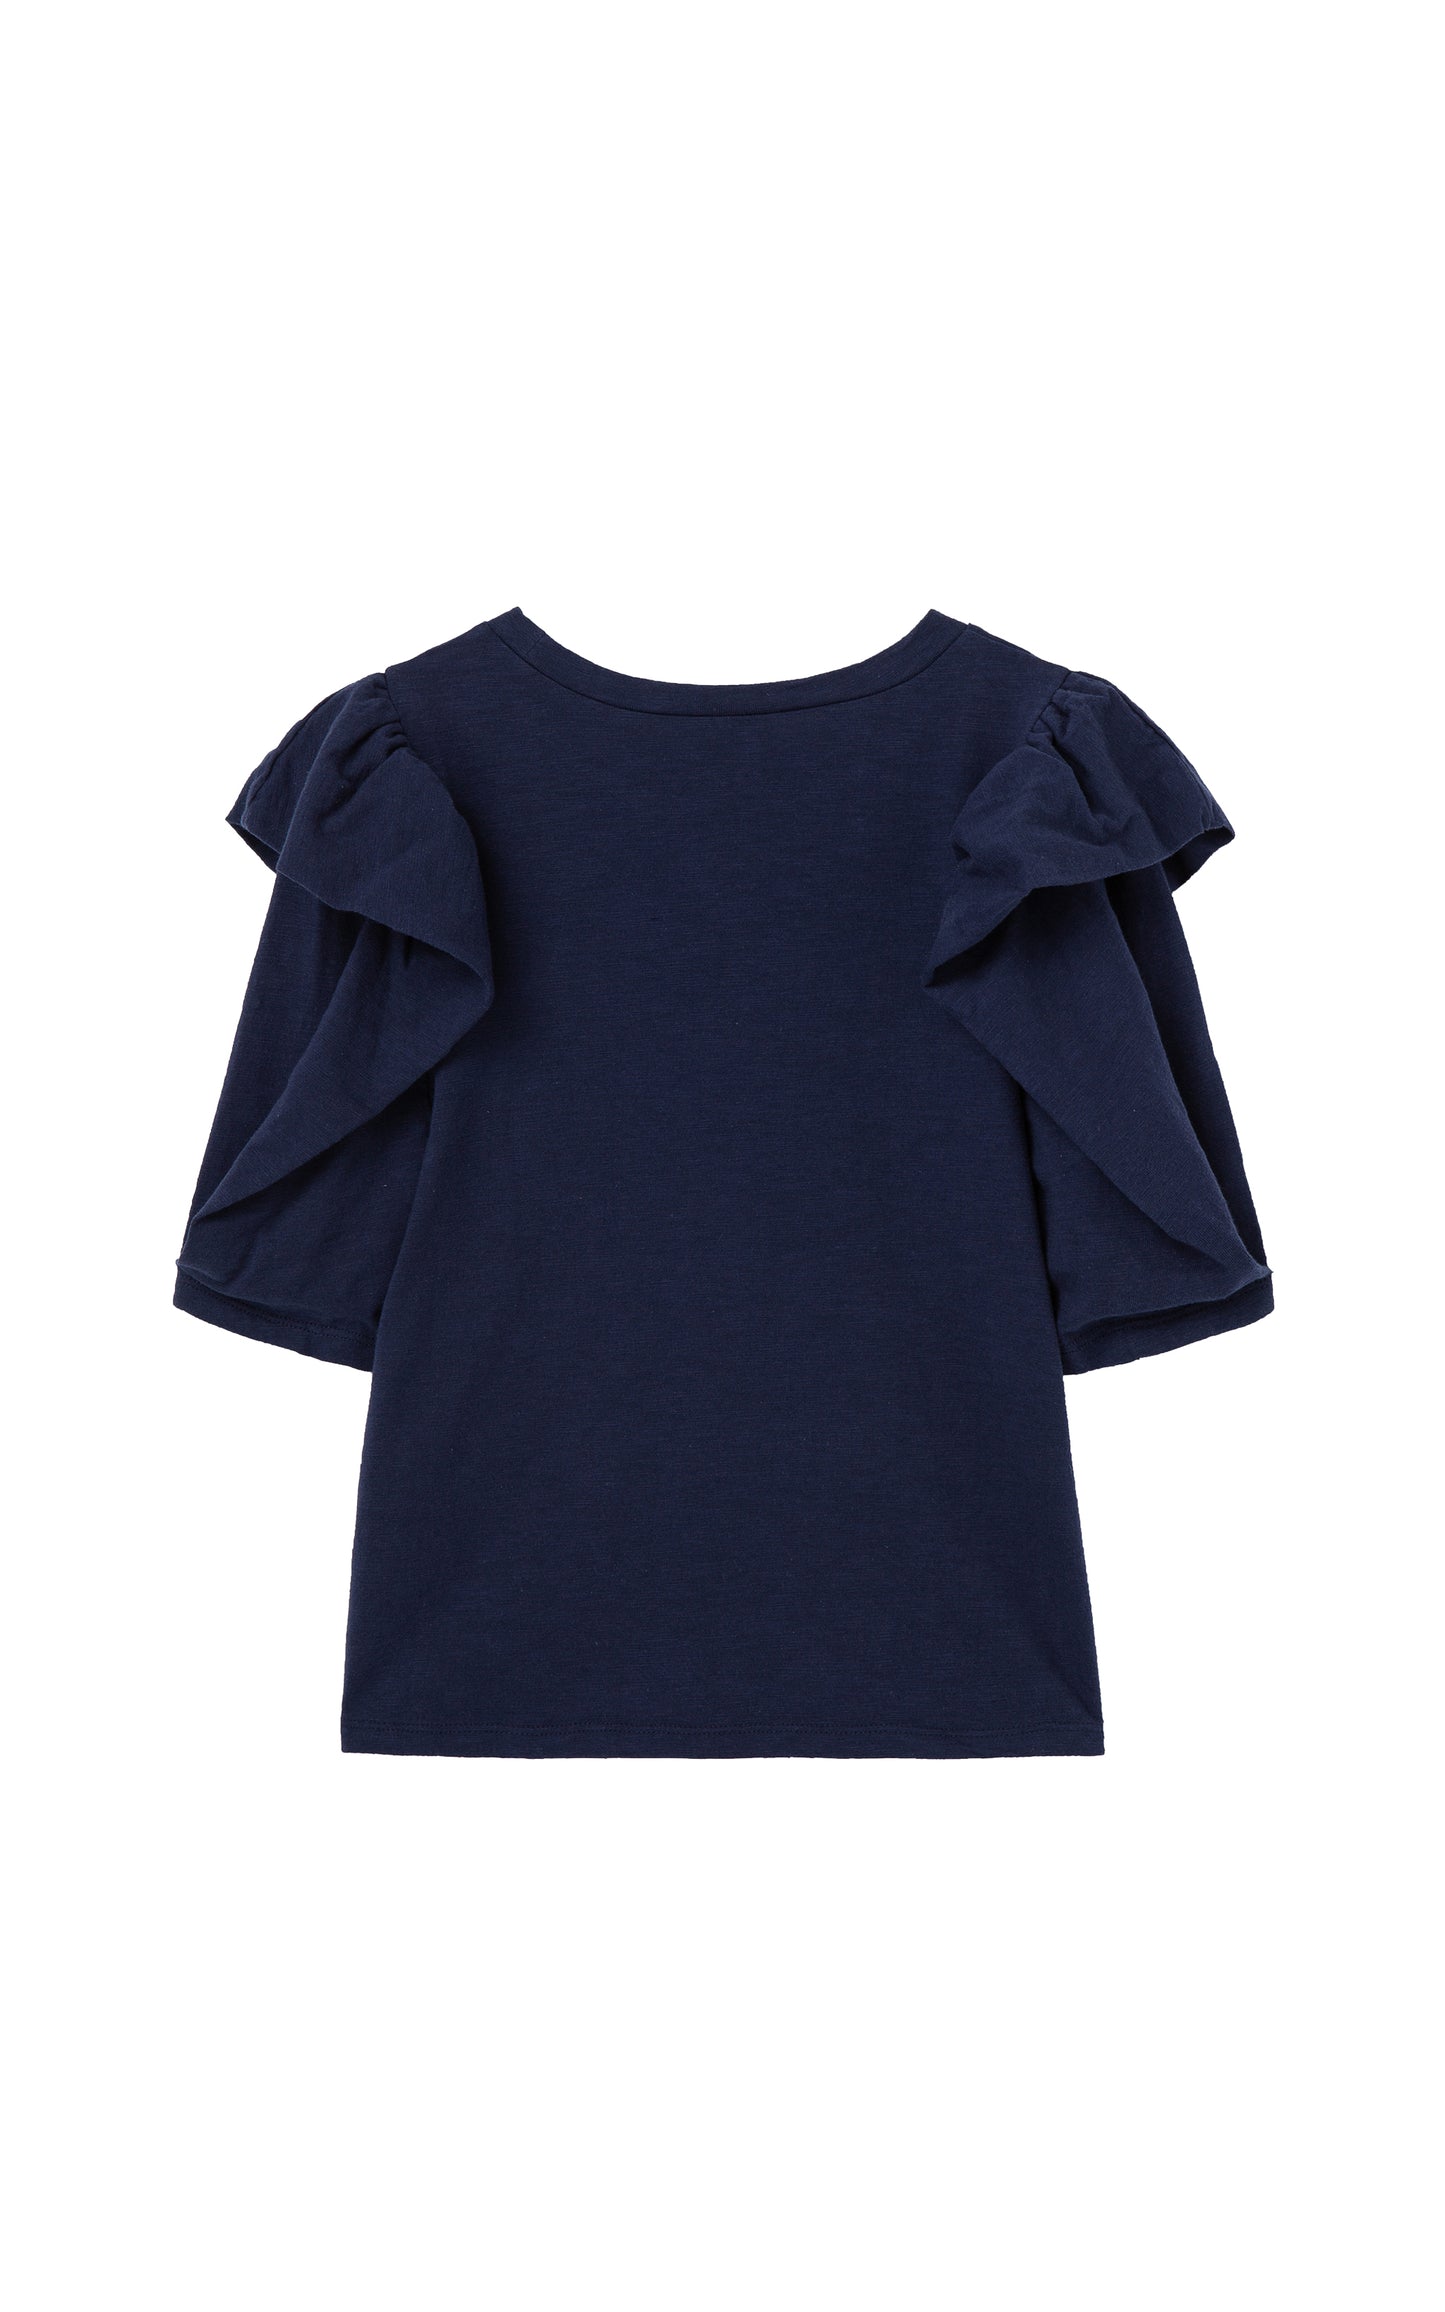 Back View Navy blue Top with Large sleeve ruffle 